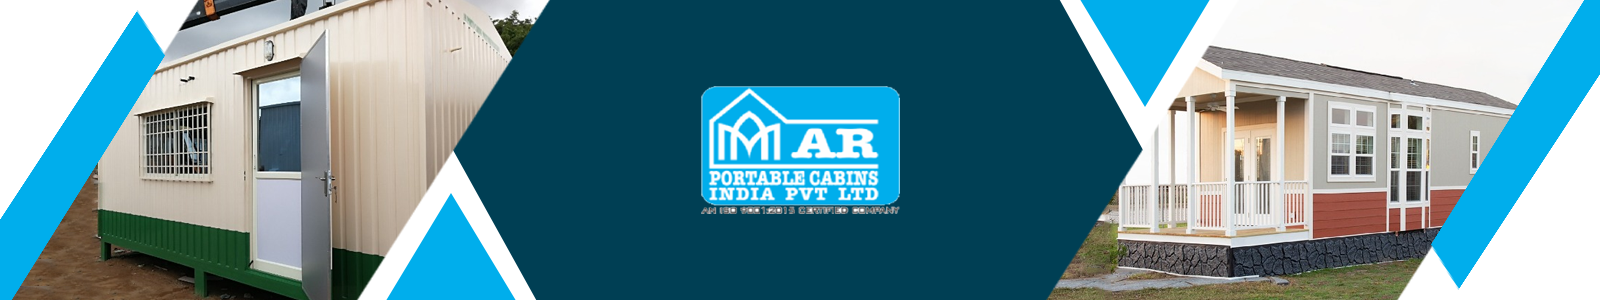 Arportable Cabins India Private Limited